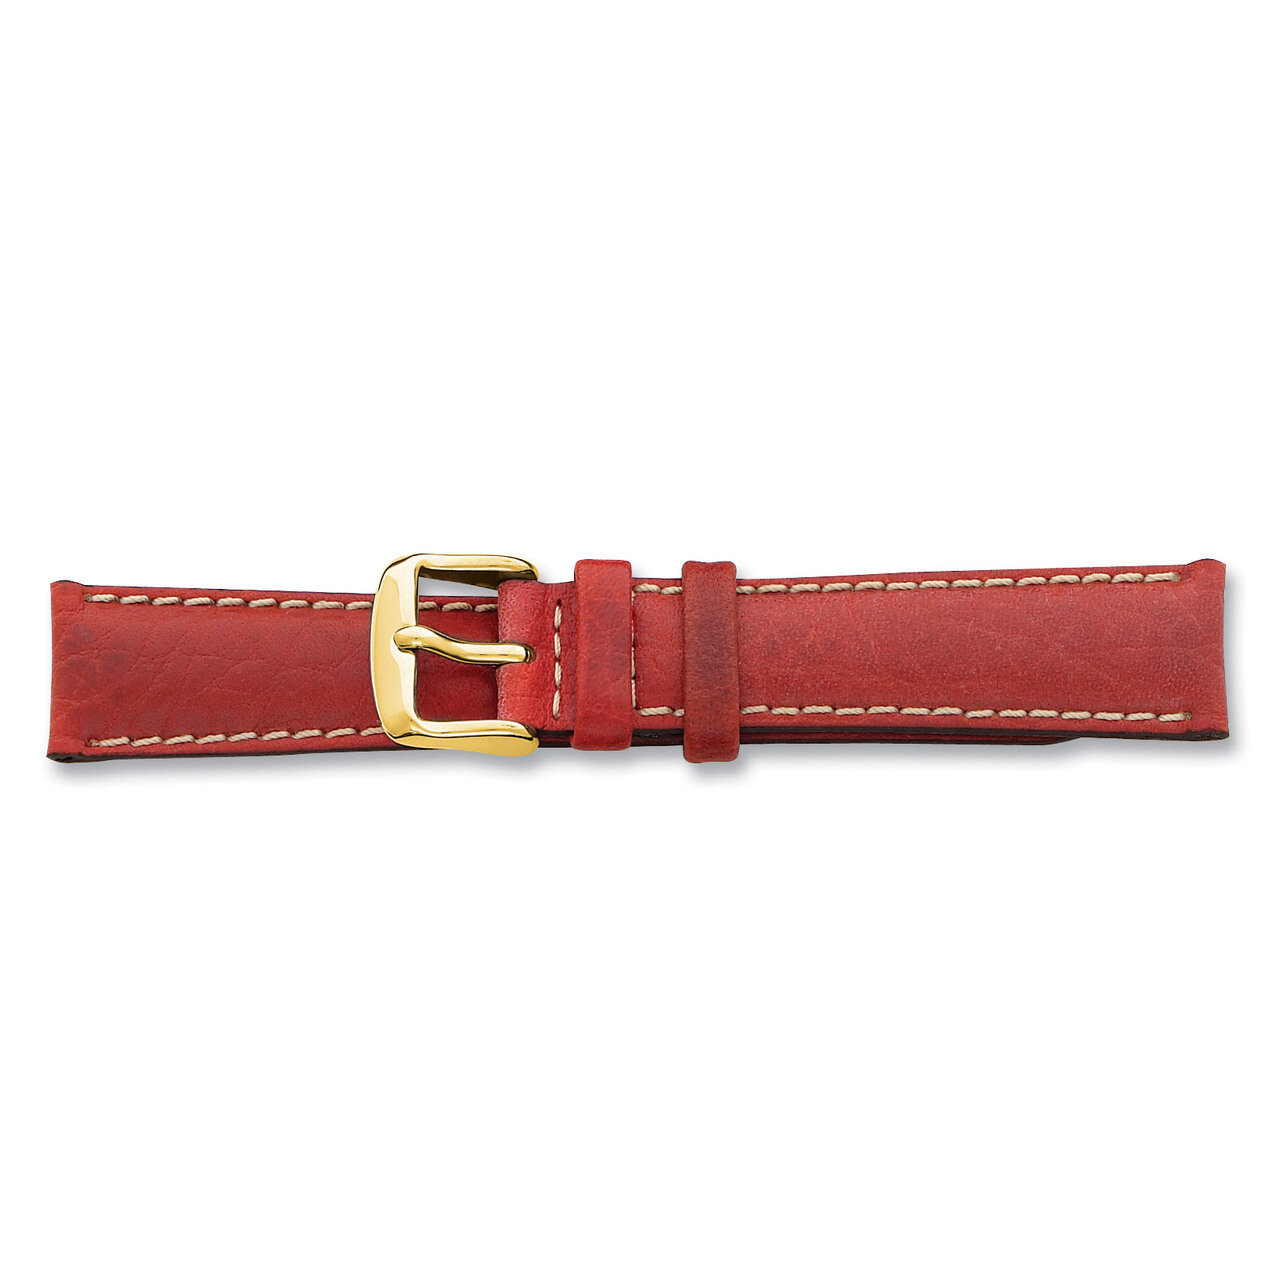 22mm Red Sport Leather White Stitch Buckle Watch Band 7.5 Inch Gold-tone BAY138-22